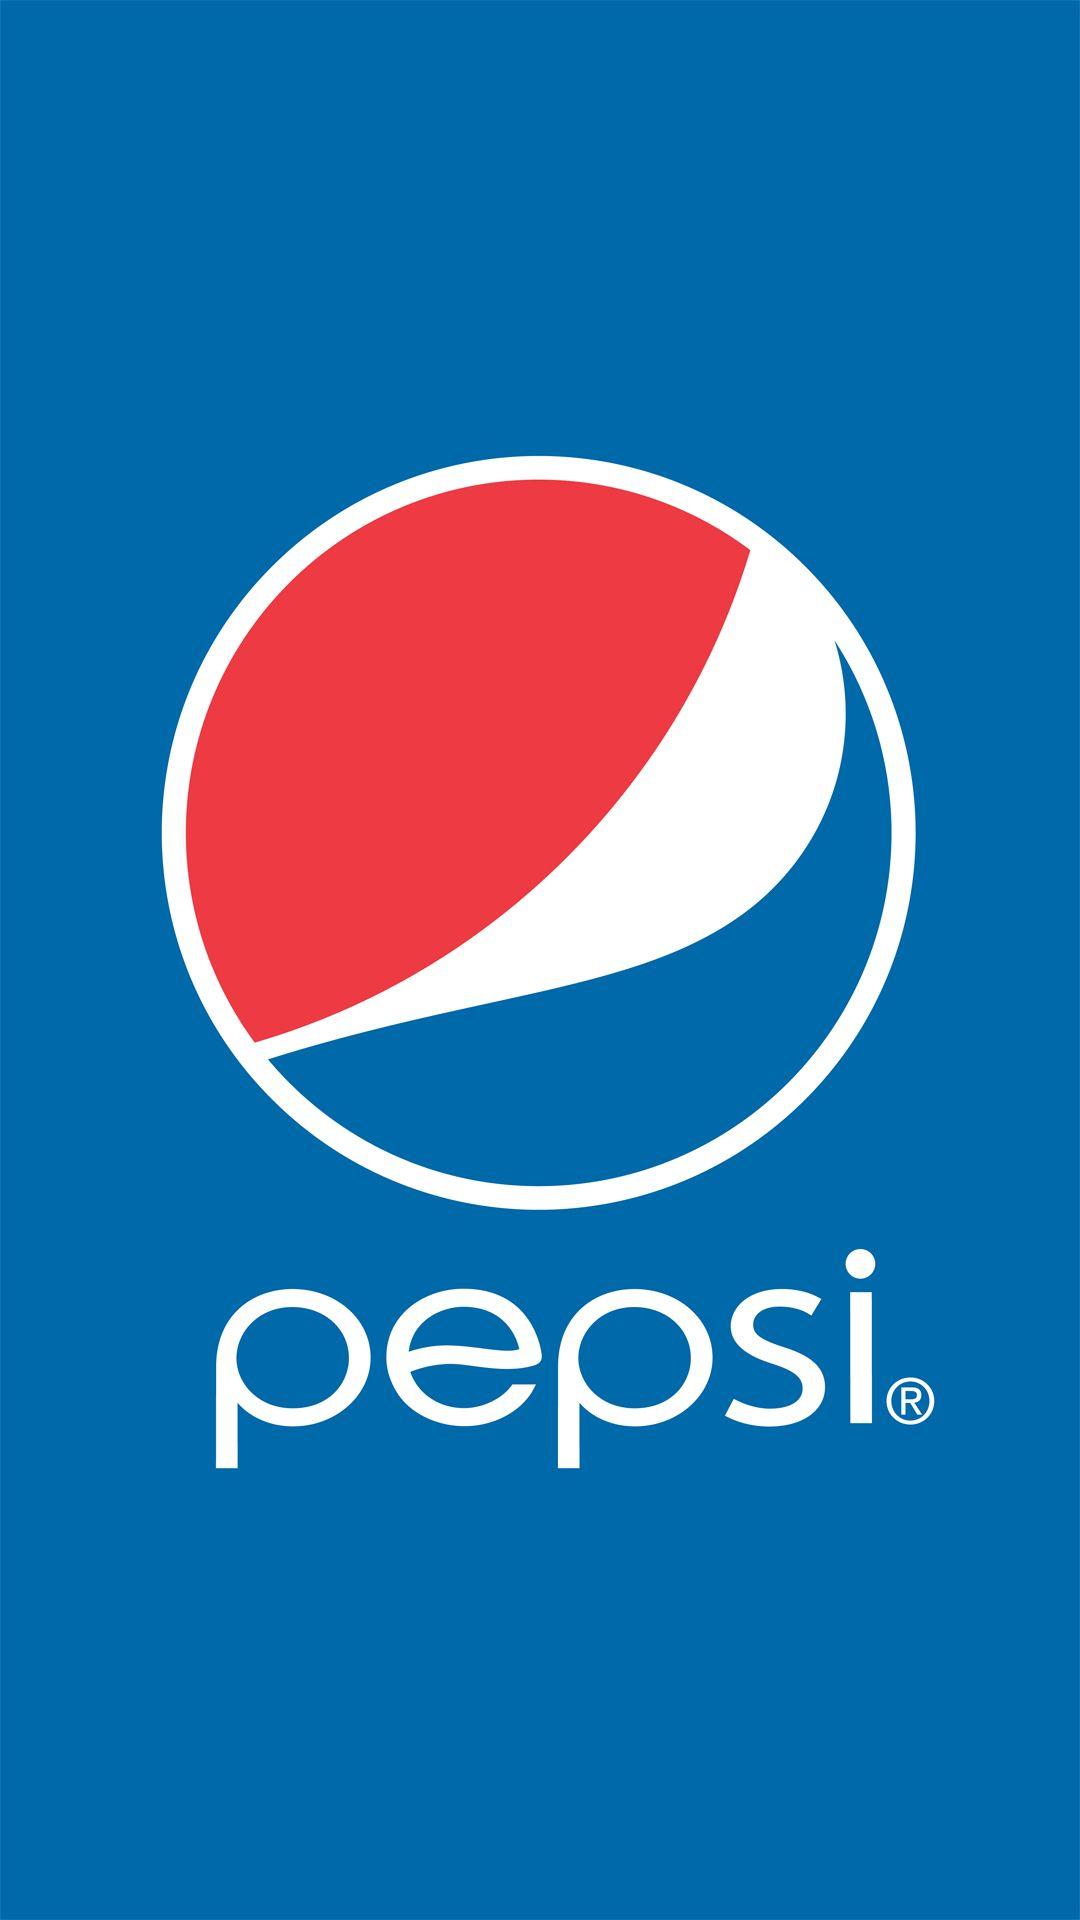 Pepci Logo - Pepsi logo - Best htc one wallpapers, free and easy to download